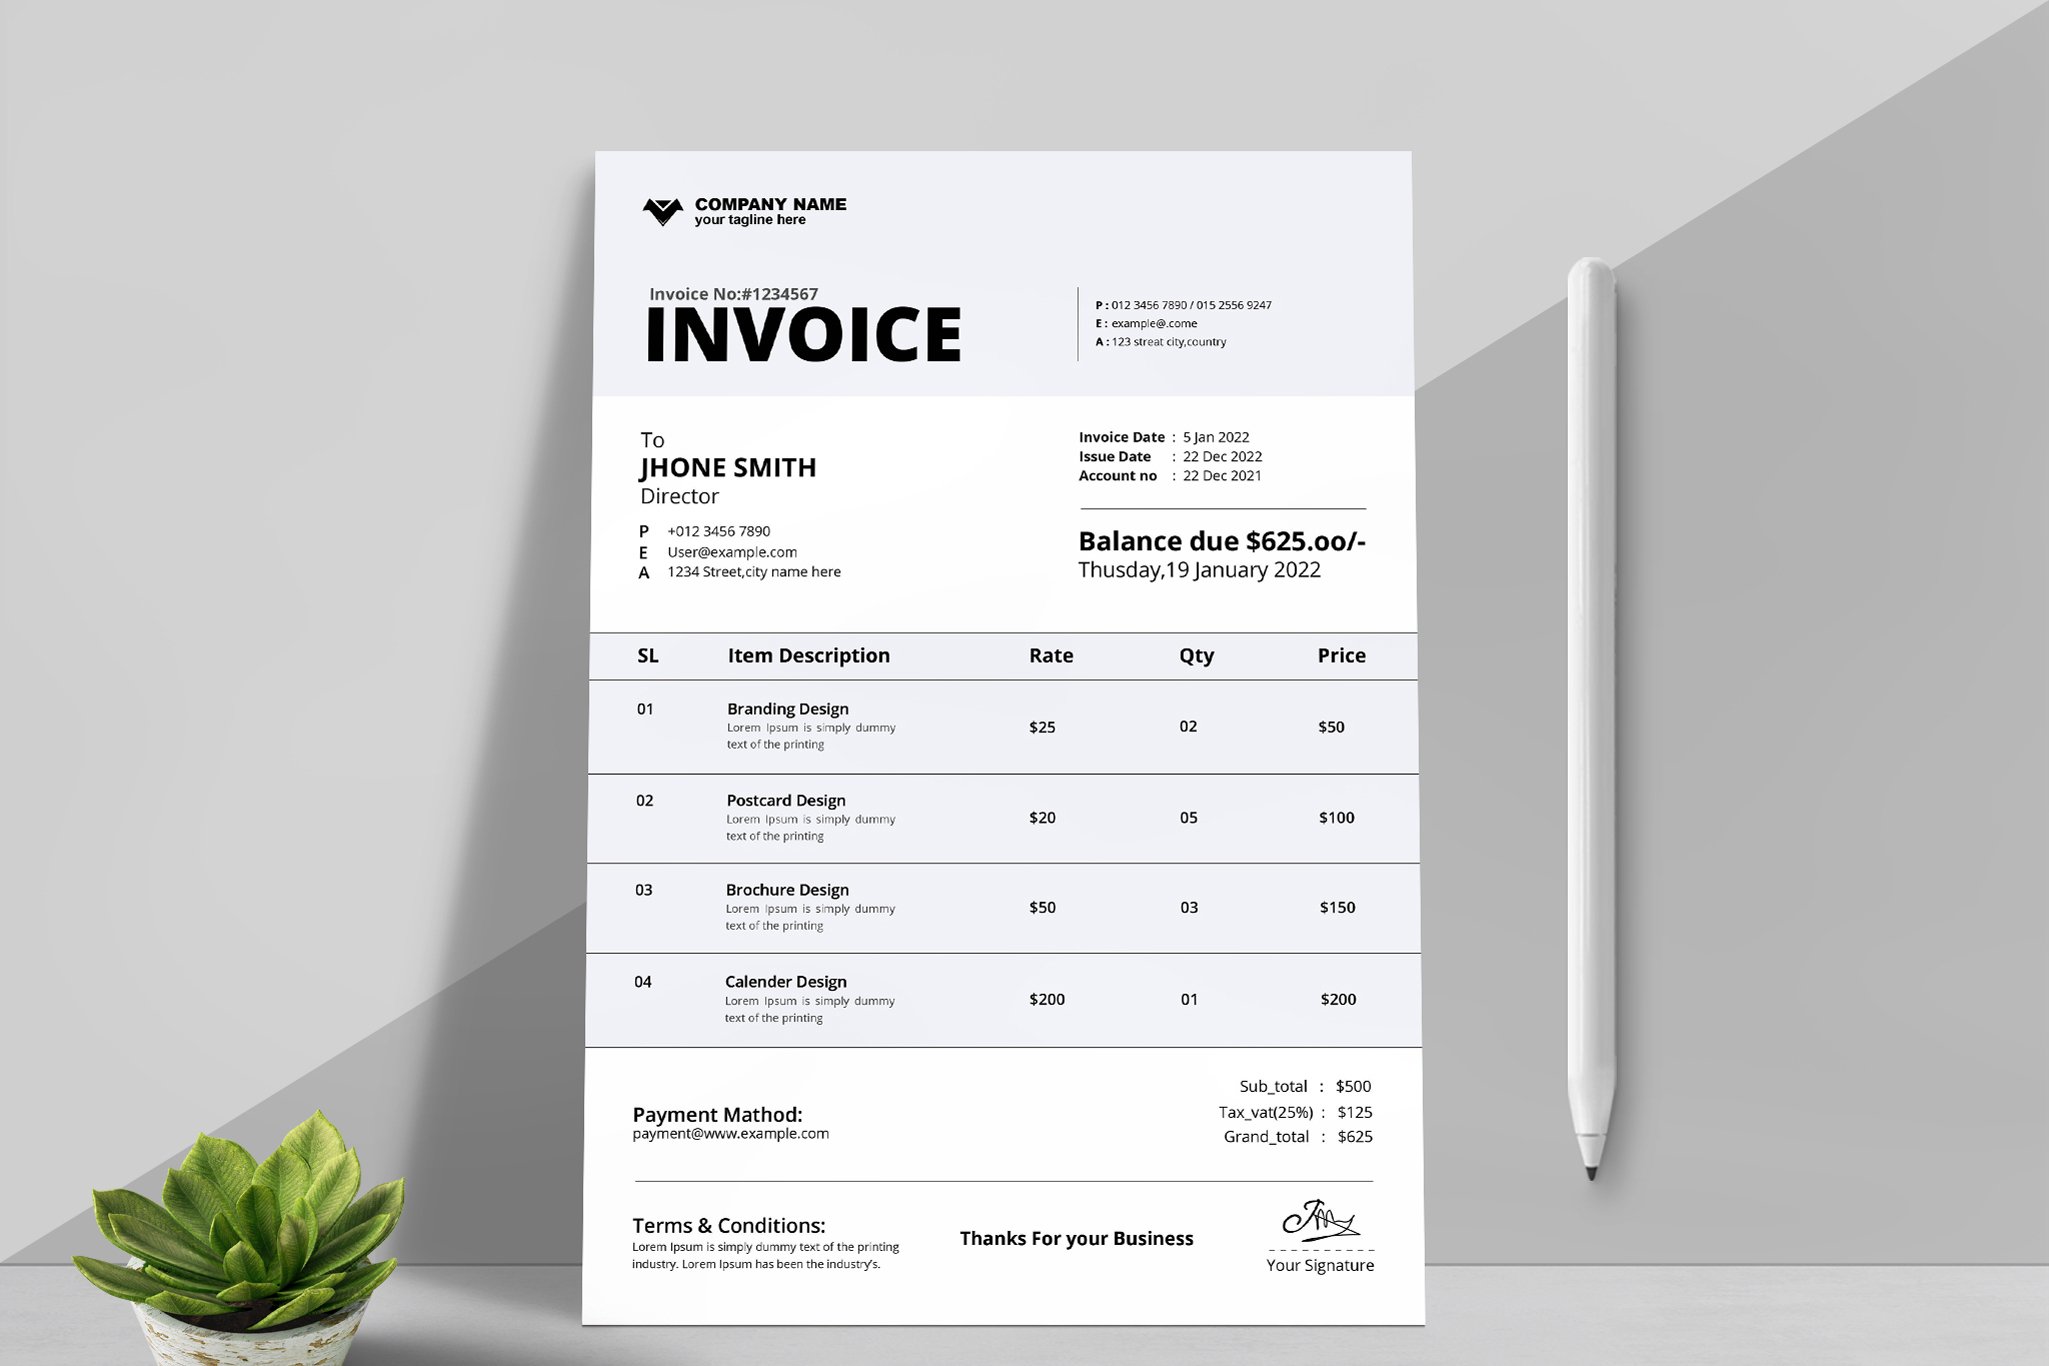 New Invoice Layout cover image.